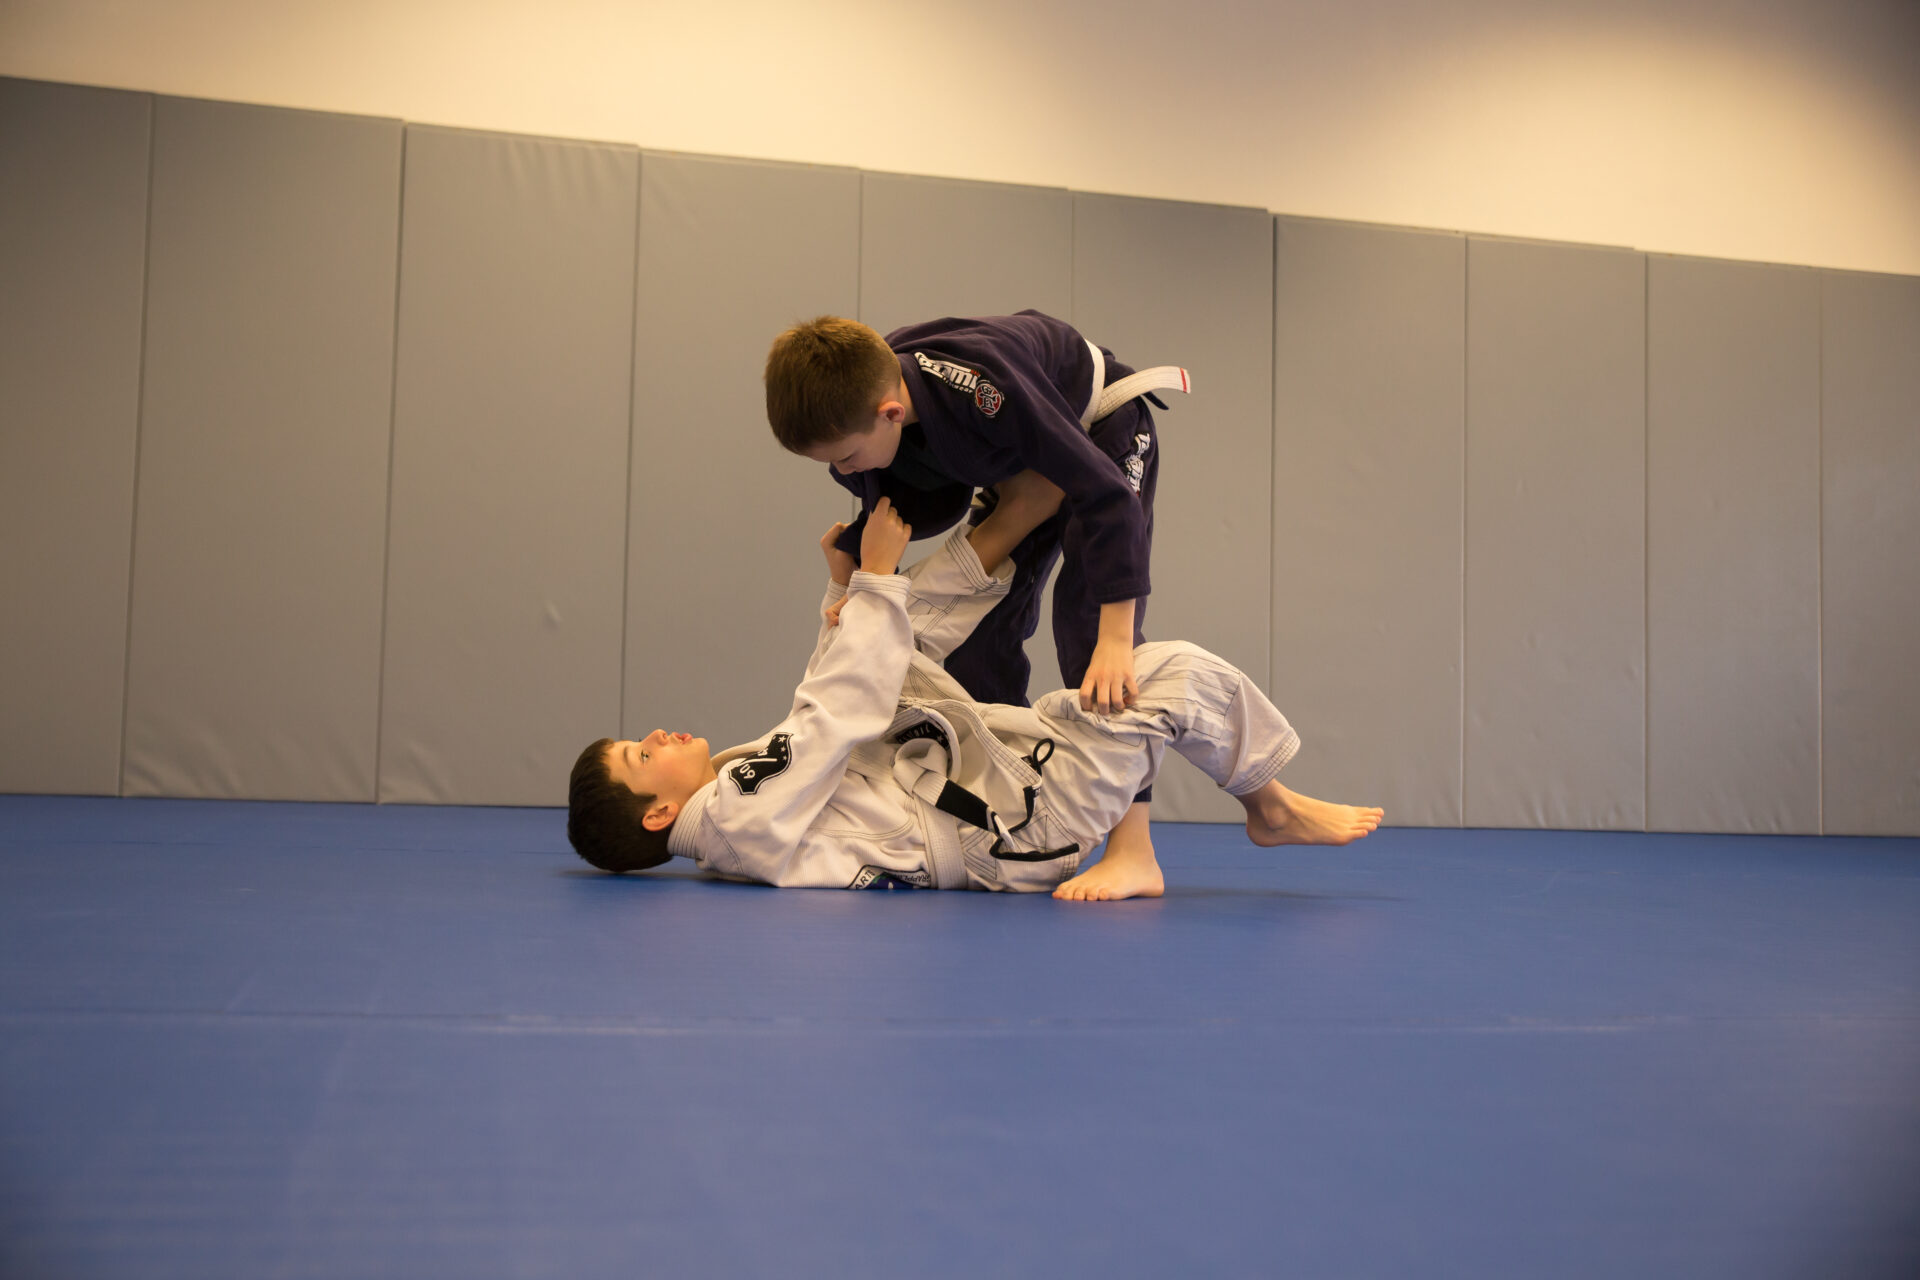 Two boys are practicing martial arts on a blue mat.